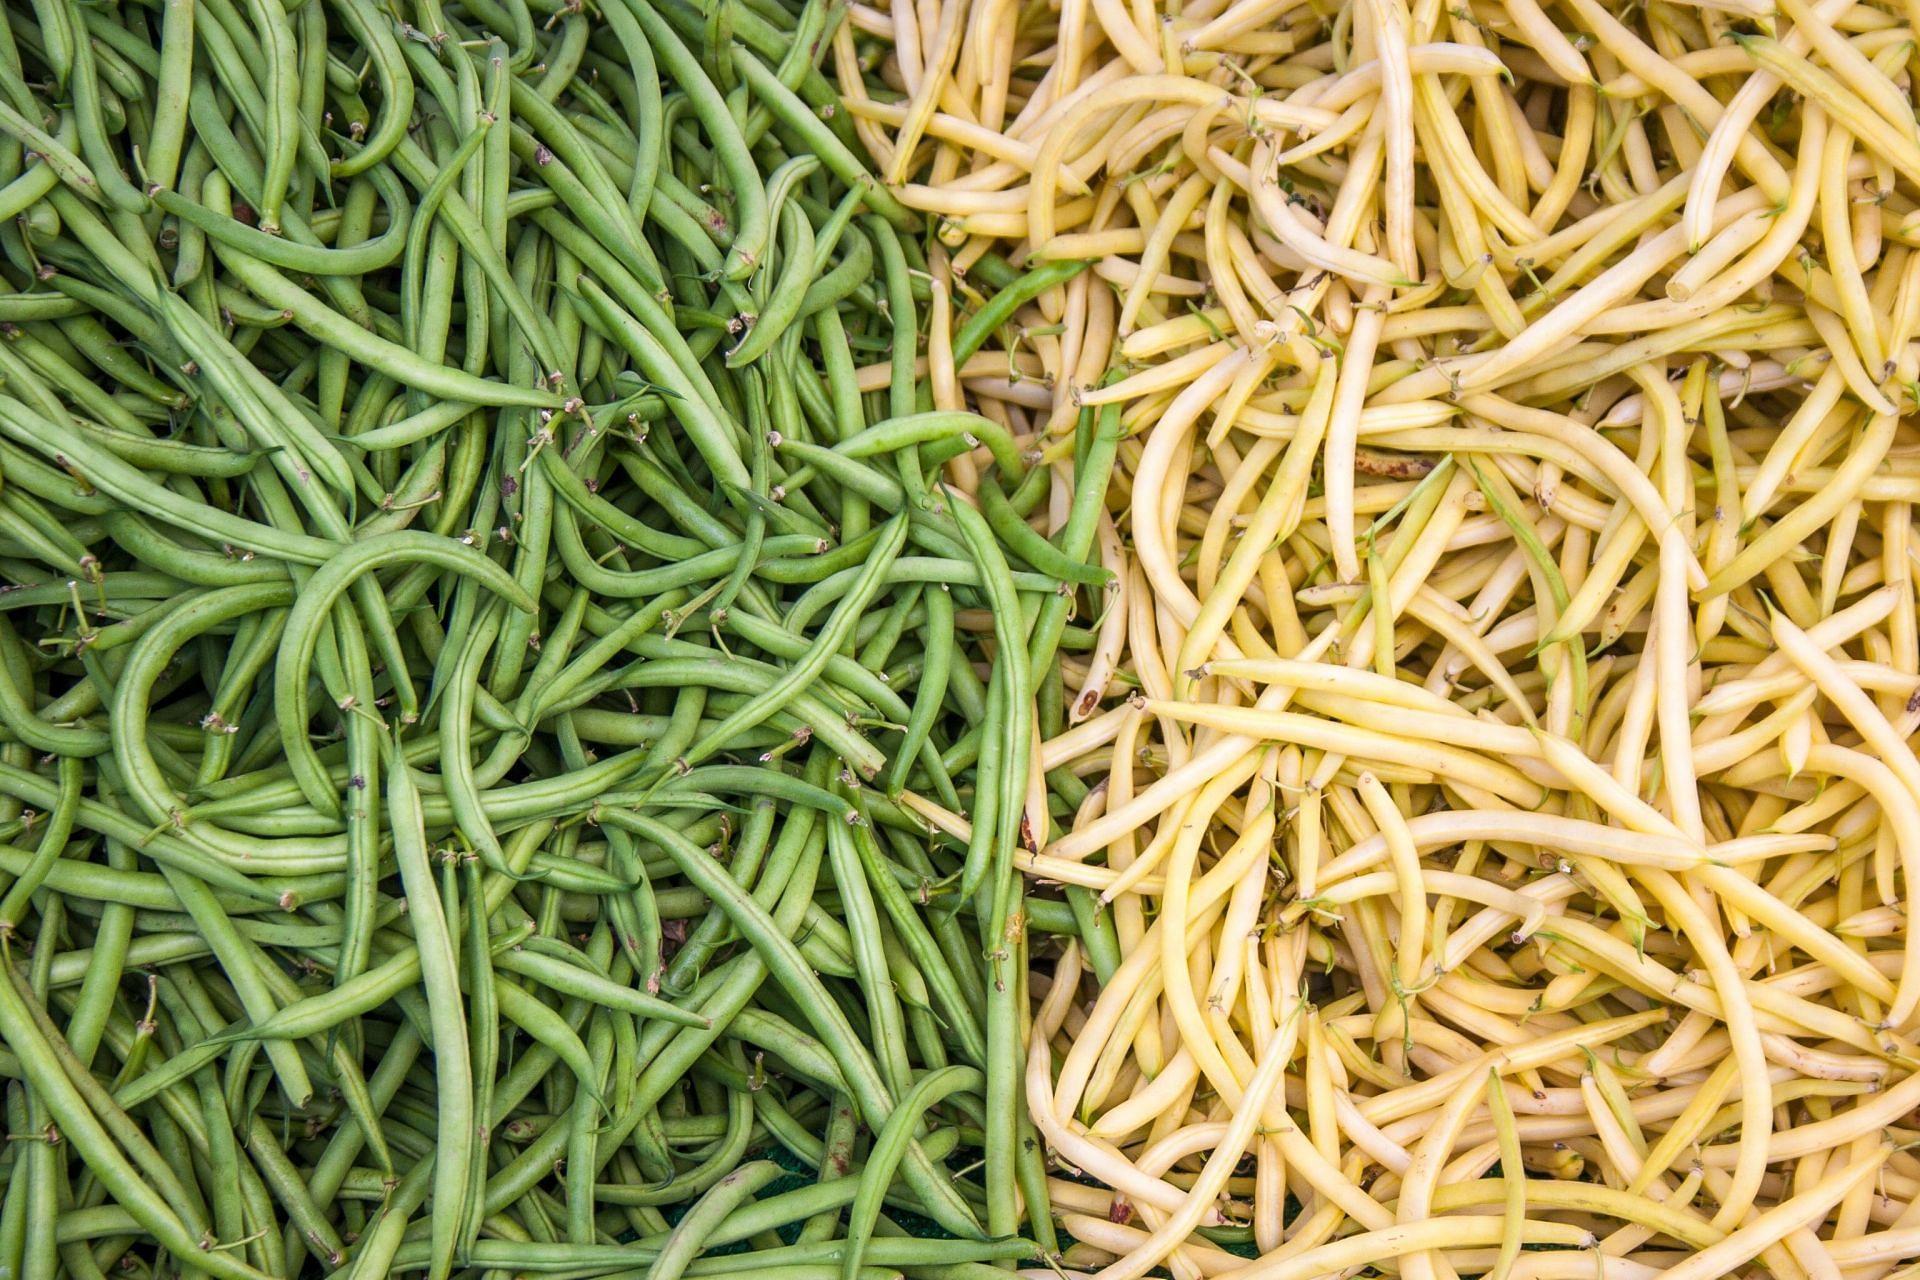 Beans is a great addition to diet and one of the vegetables high in fiber. (Image via Unsplash / Jonathan Mast)